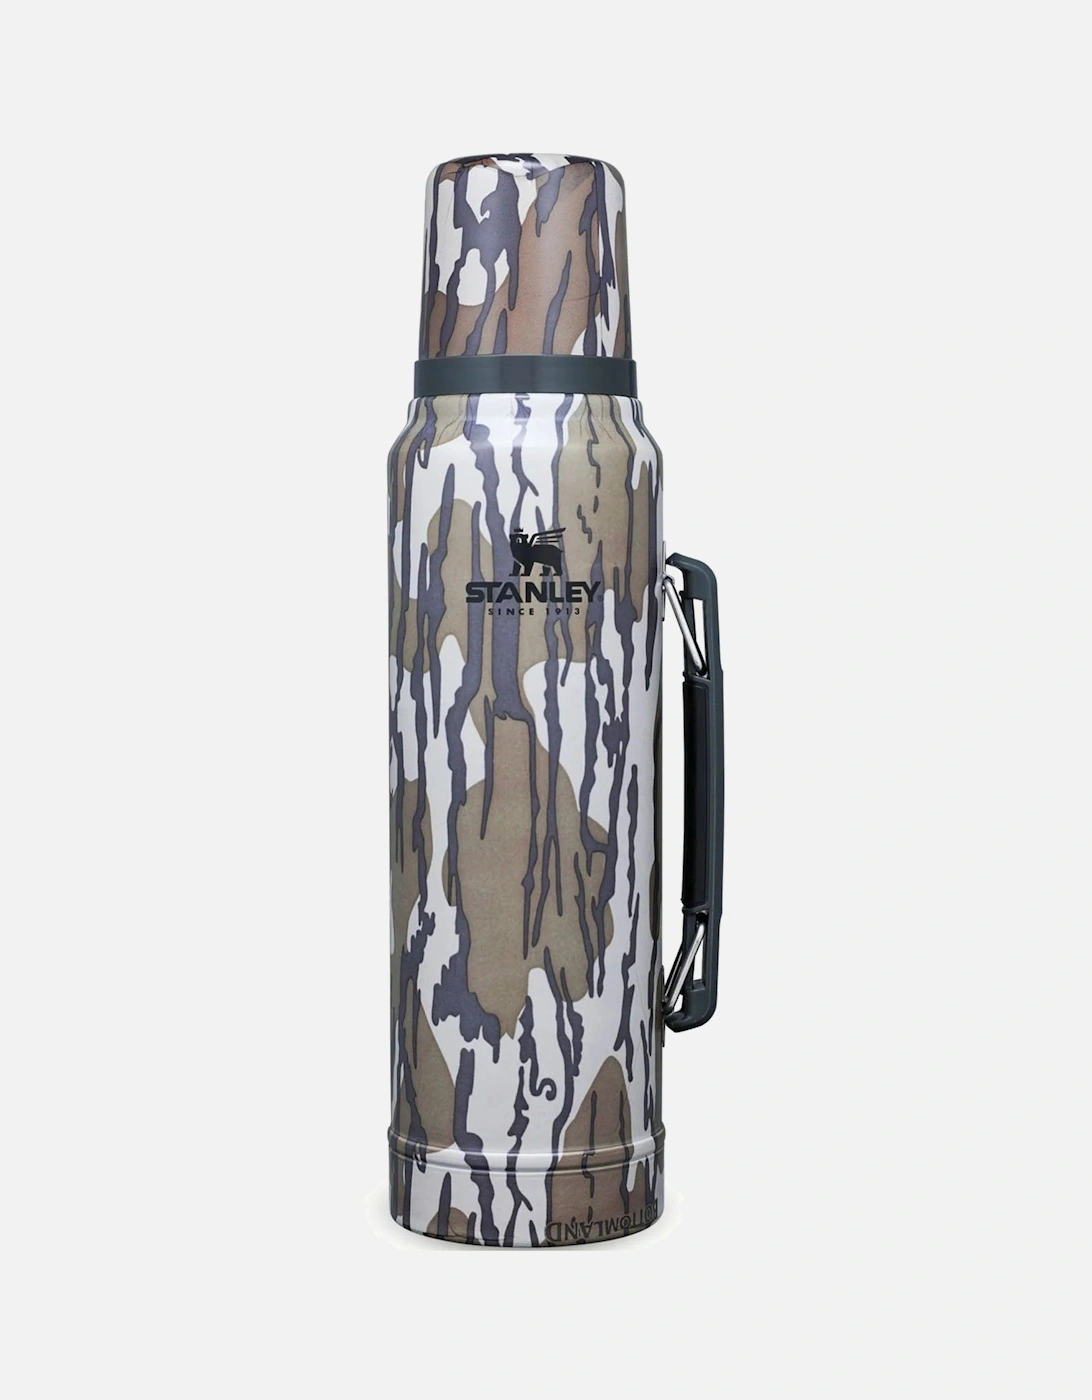 1L Classic Legendary Thermal Cold Water Bottle, 34 of 33